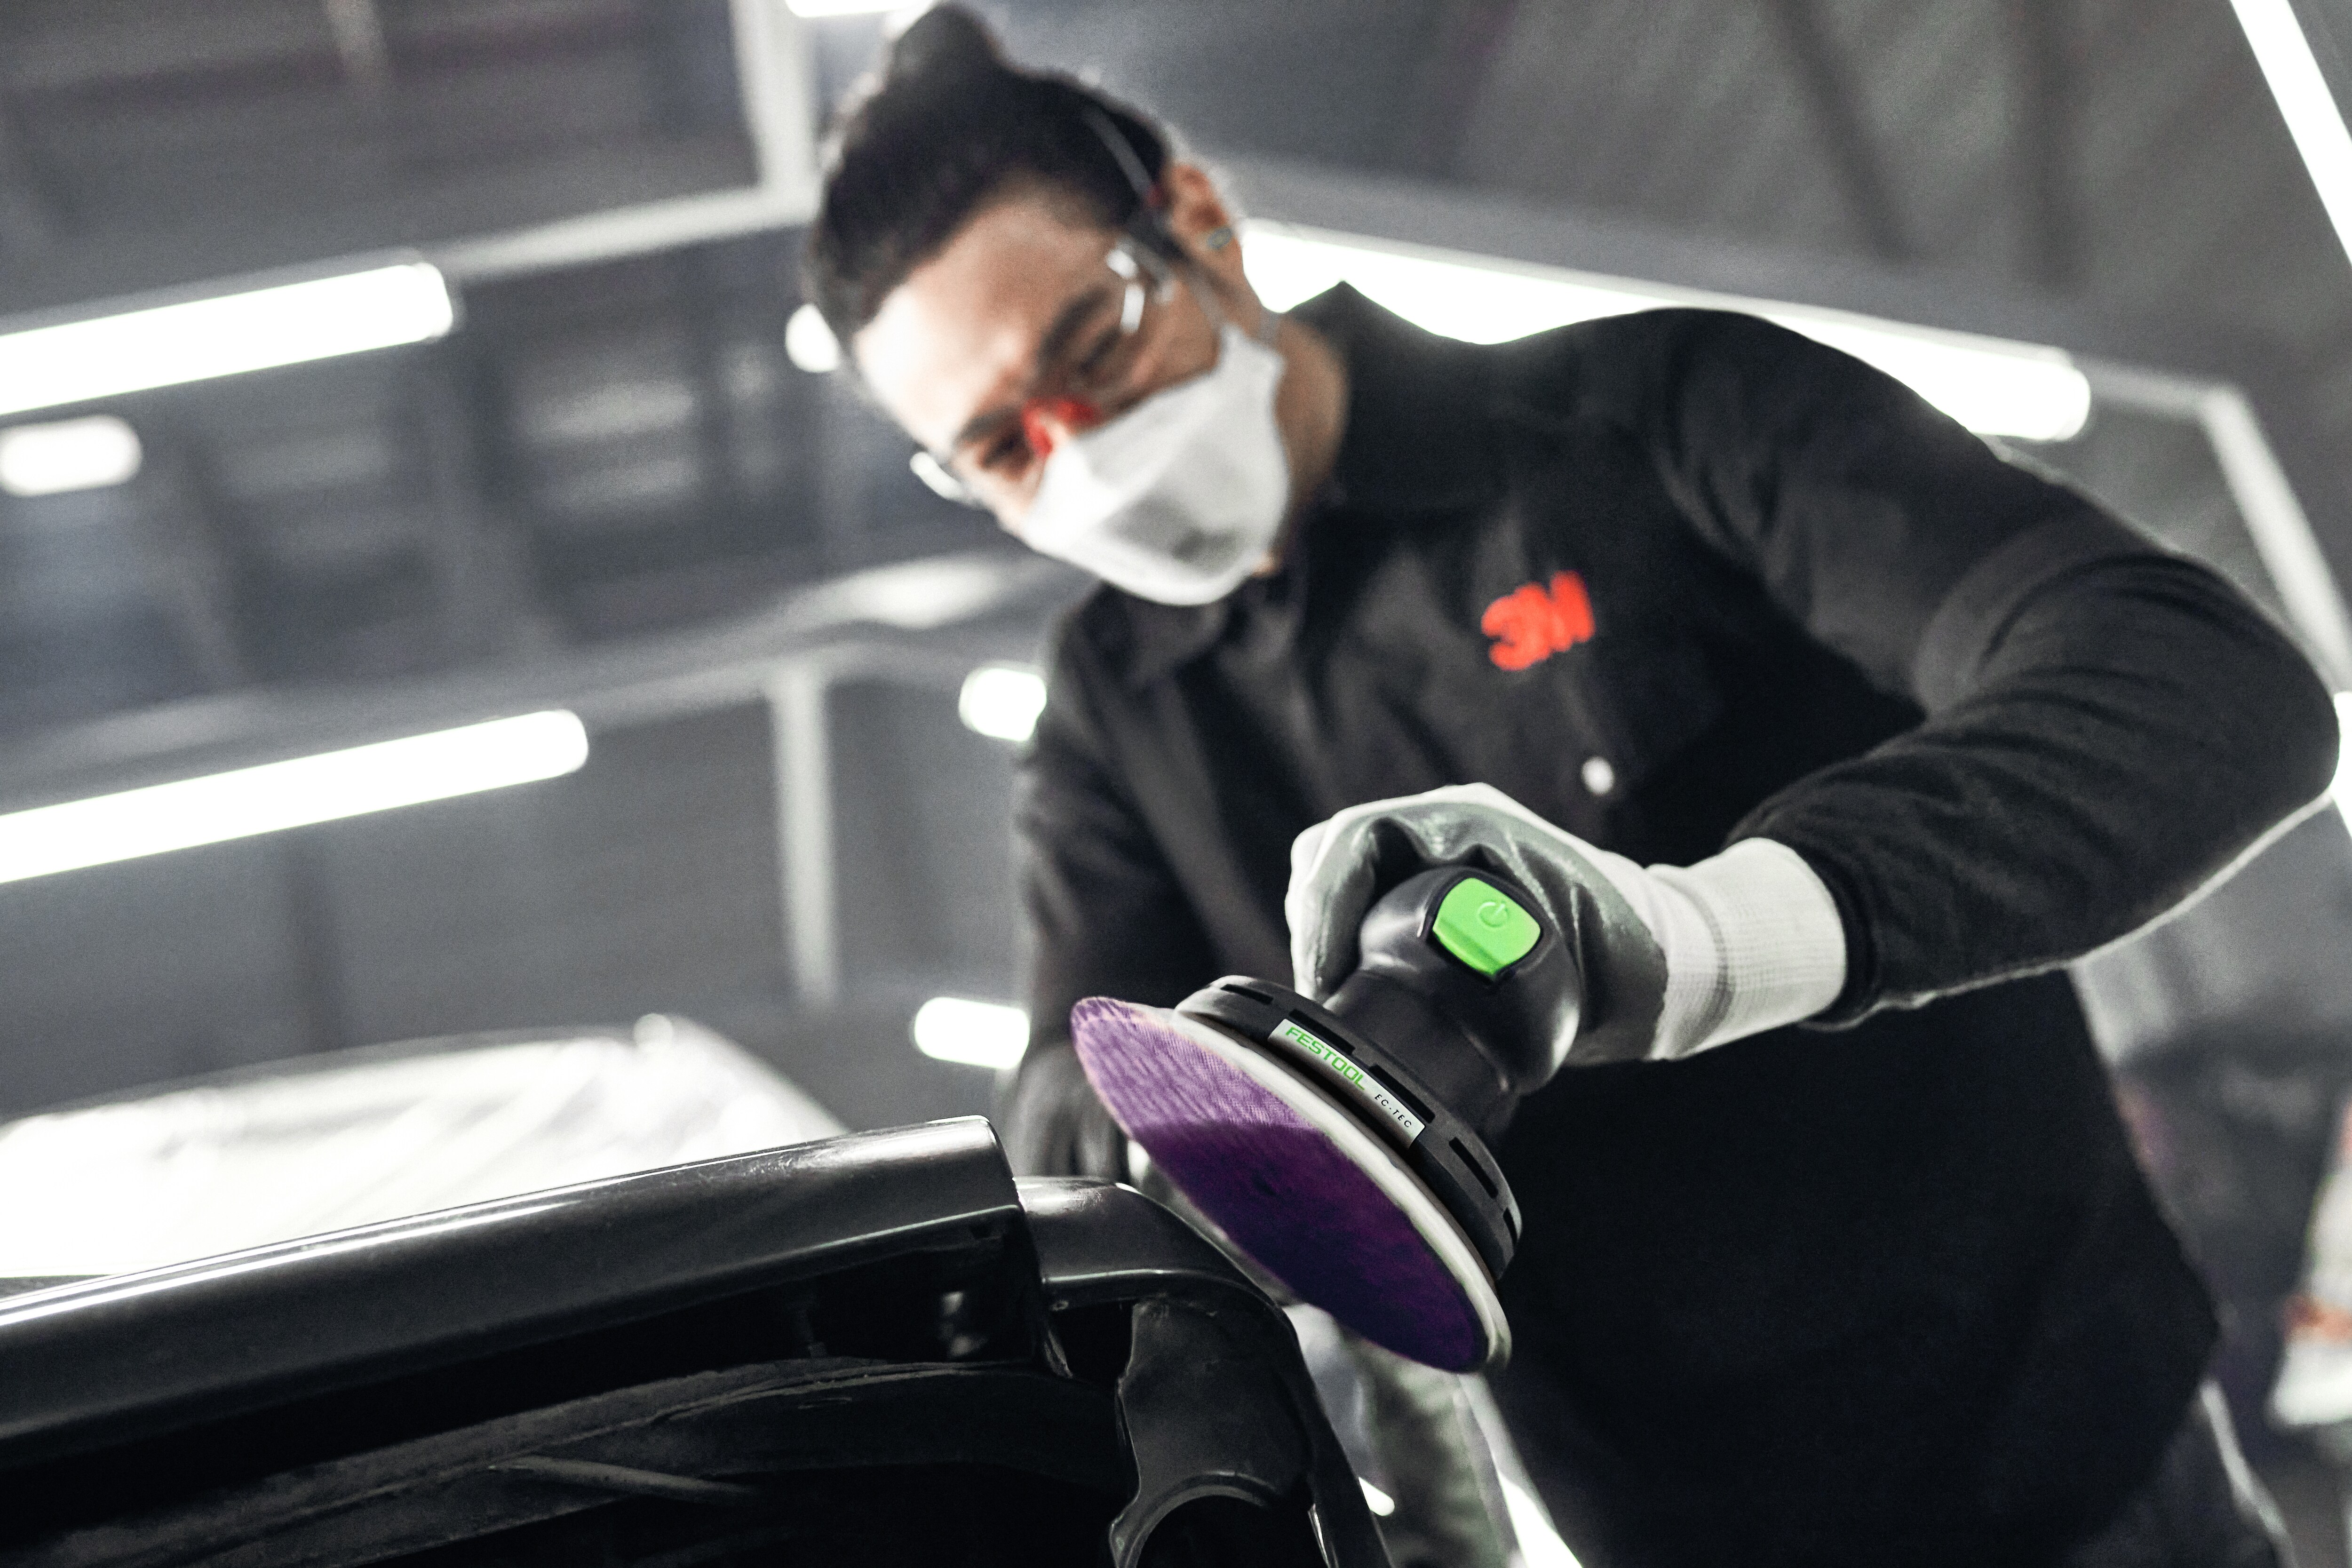 A man wearing safety glasses and a mask using an orbital sander to buff a car bumper.